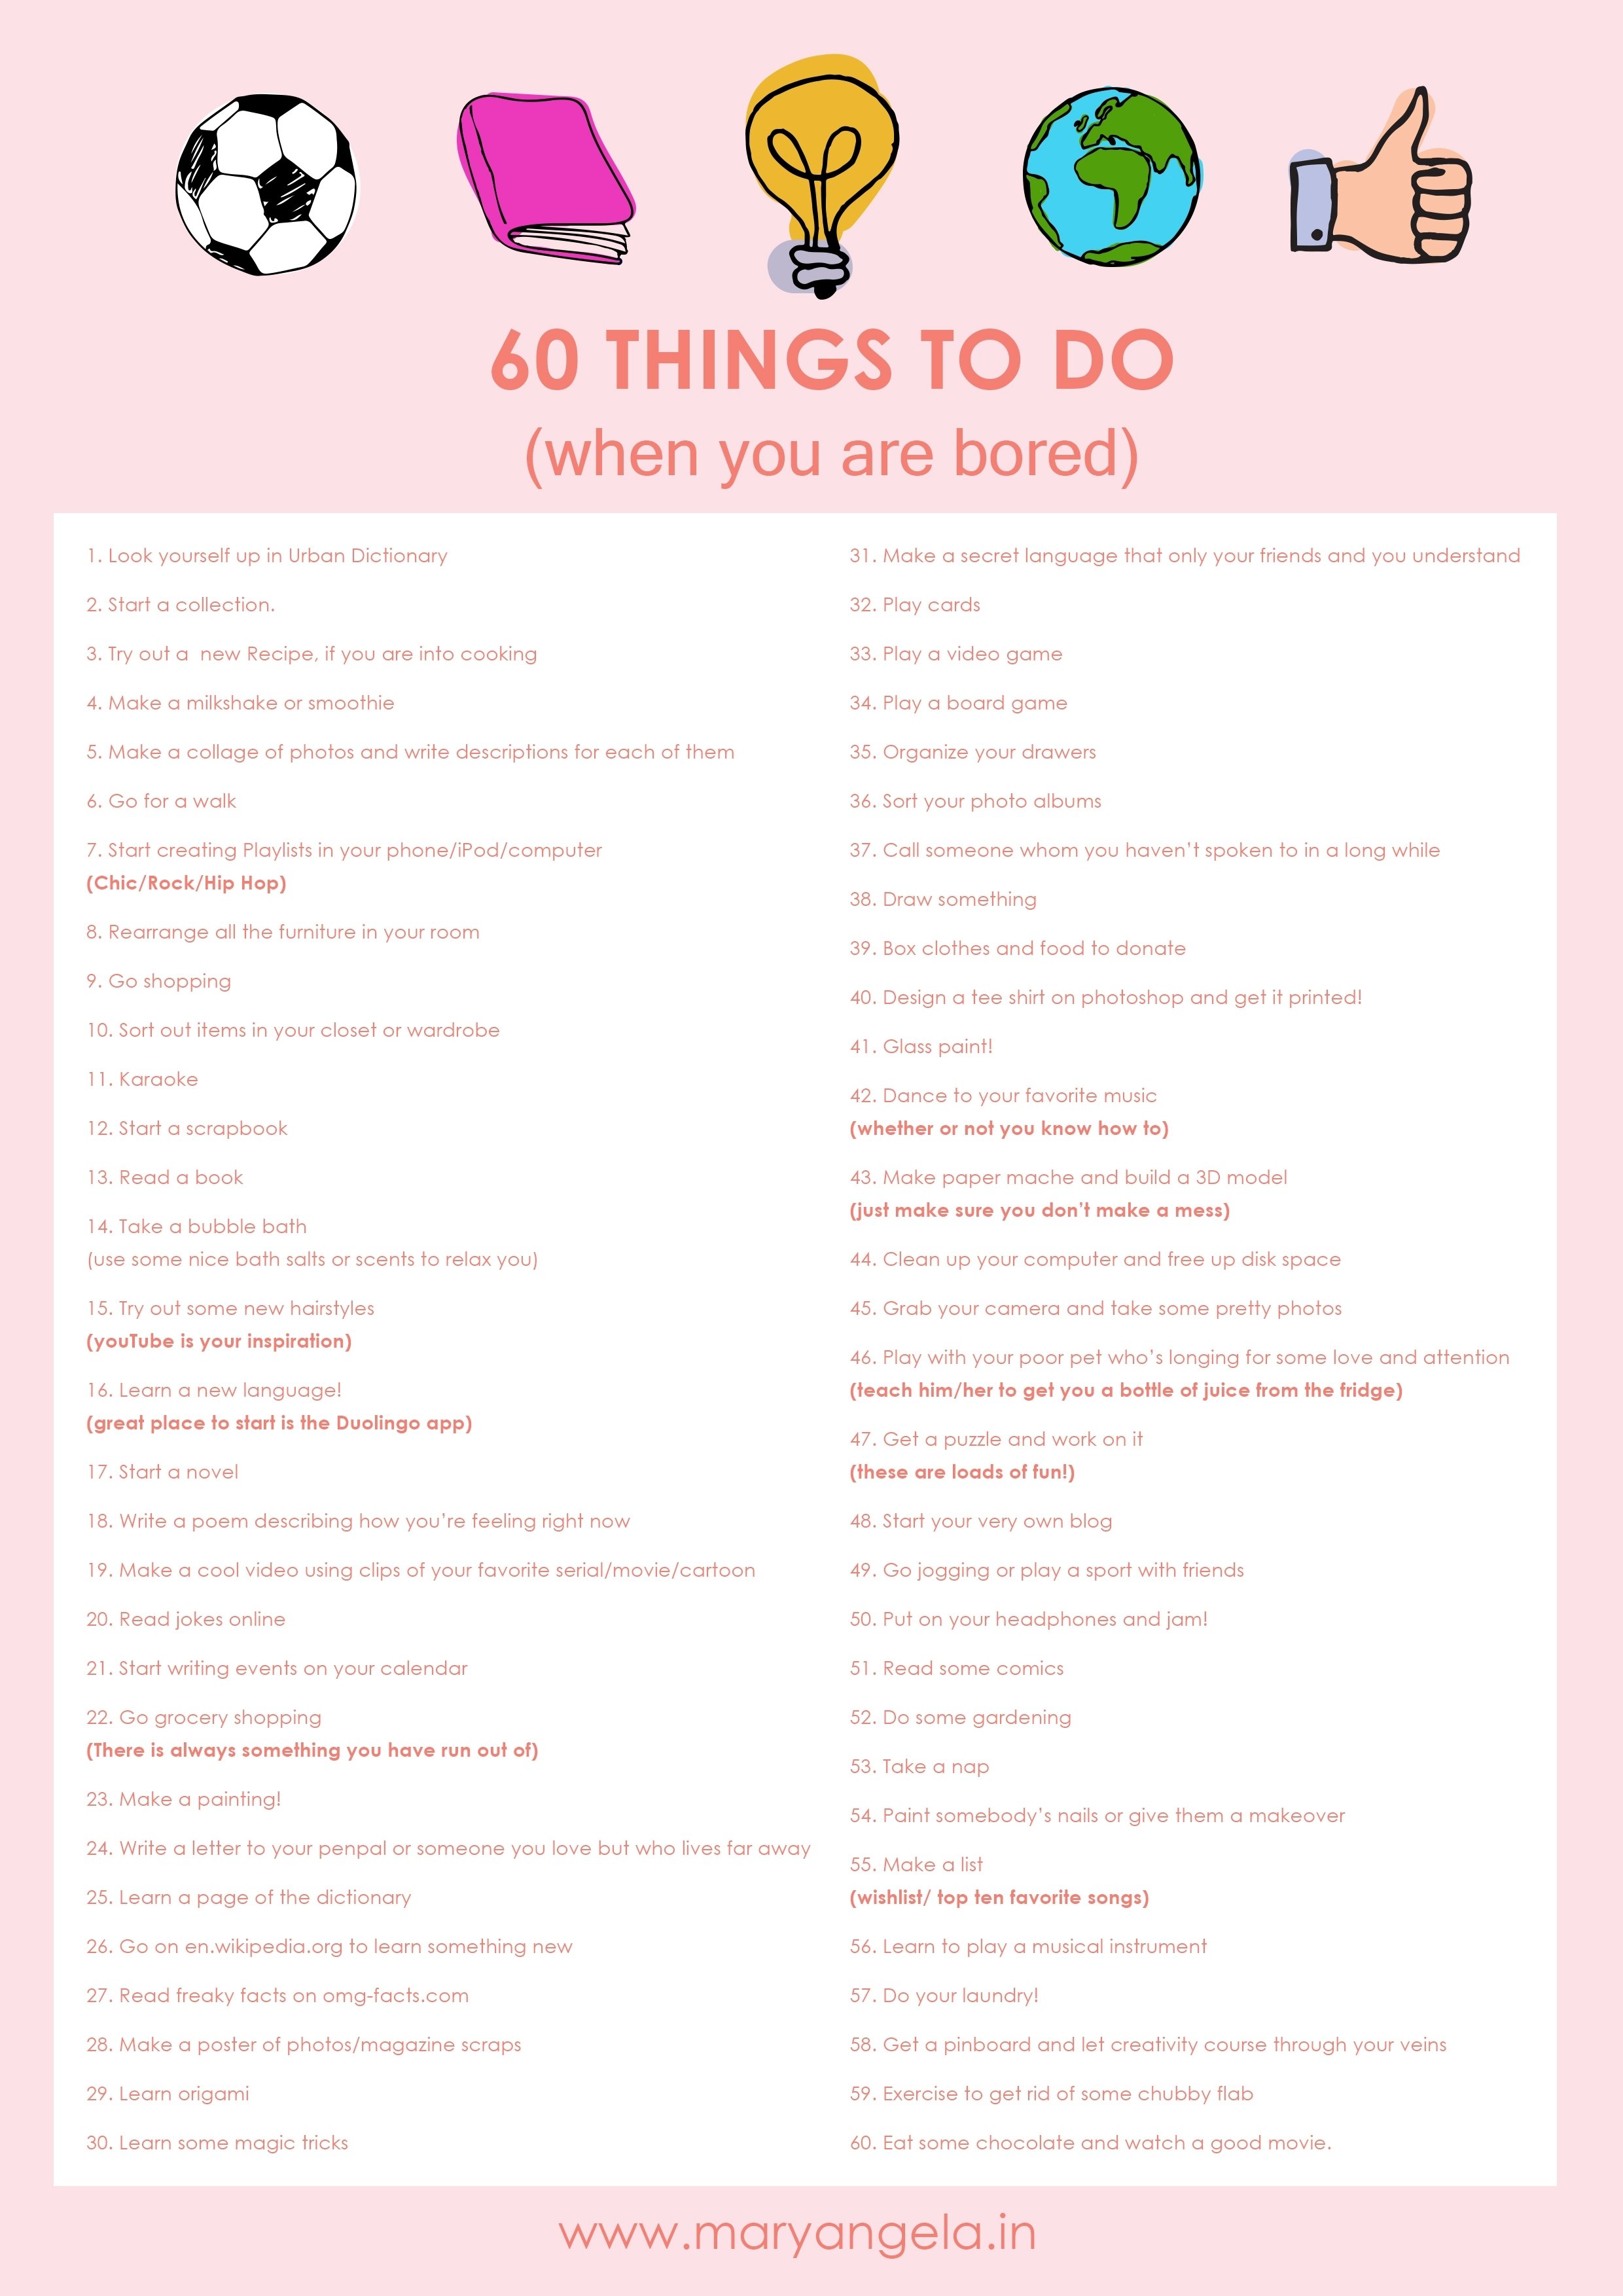 10 Unique Ideas To Do When Your Bored 60 things to do when you are bored free download free life 2022